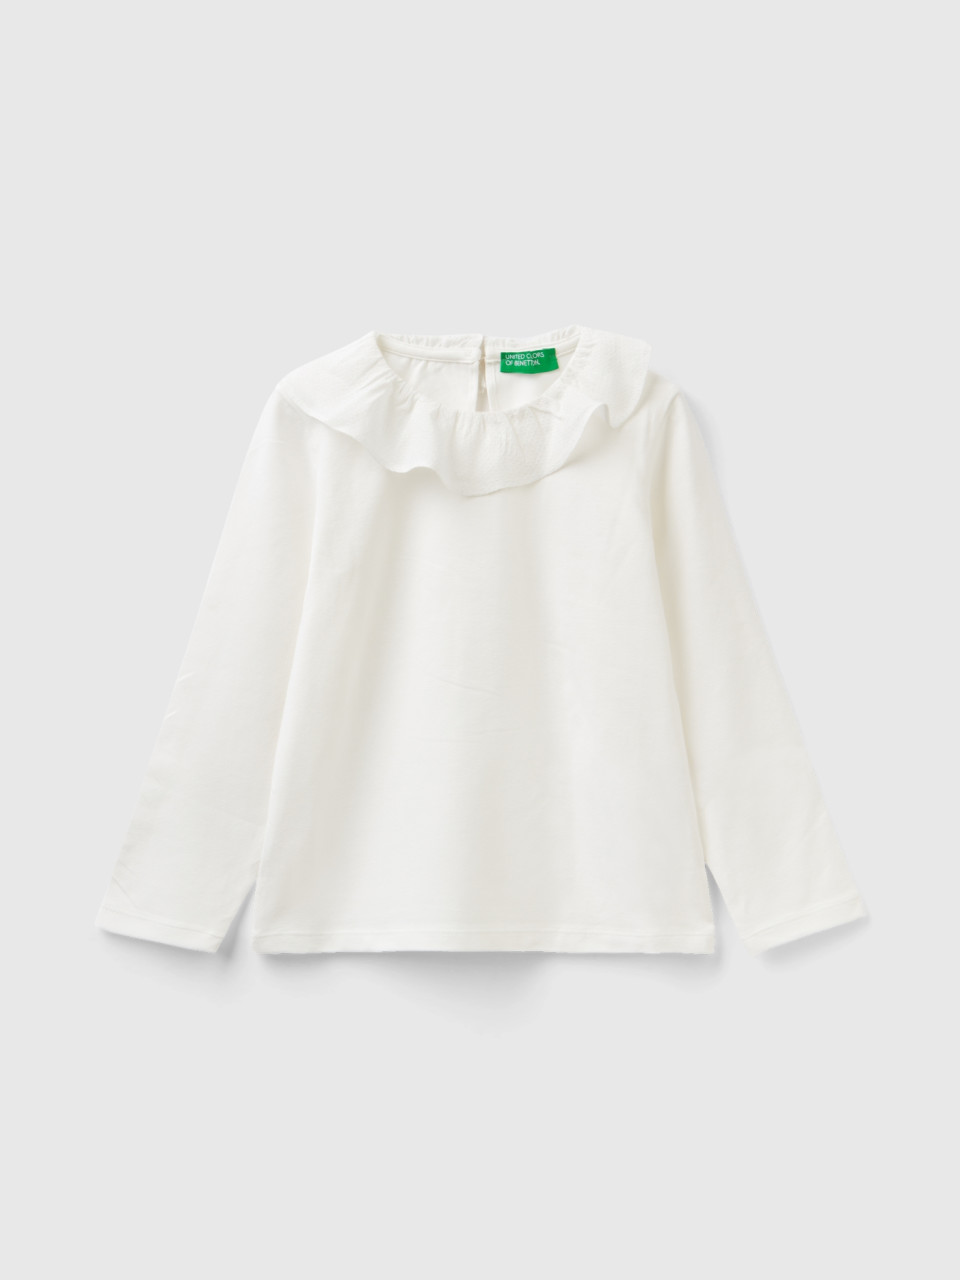 Benetton, T-shirt With Trimmed Collar, Creamy White, Kids